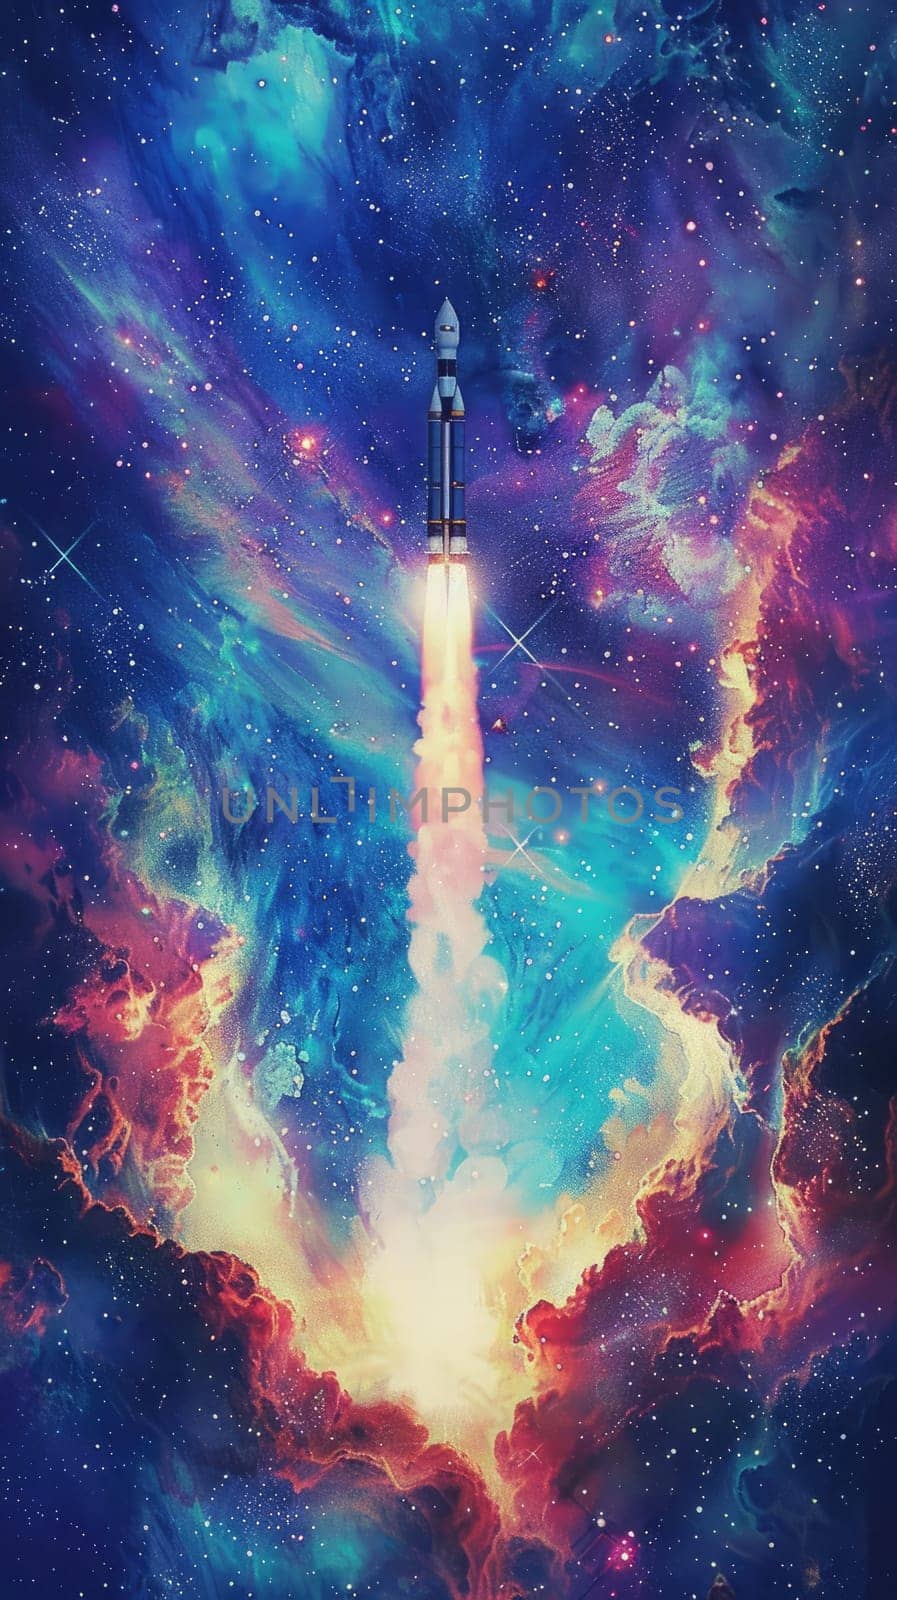 A colorful space shuttle is flying through a sky full of clouds and stars by nijieimu